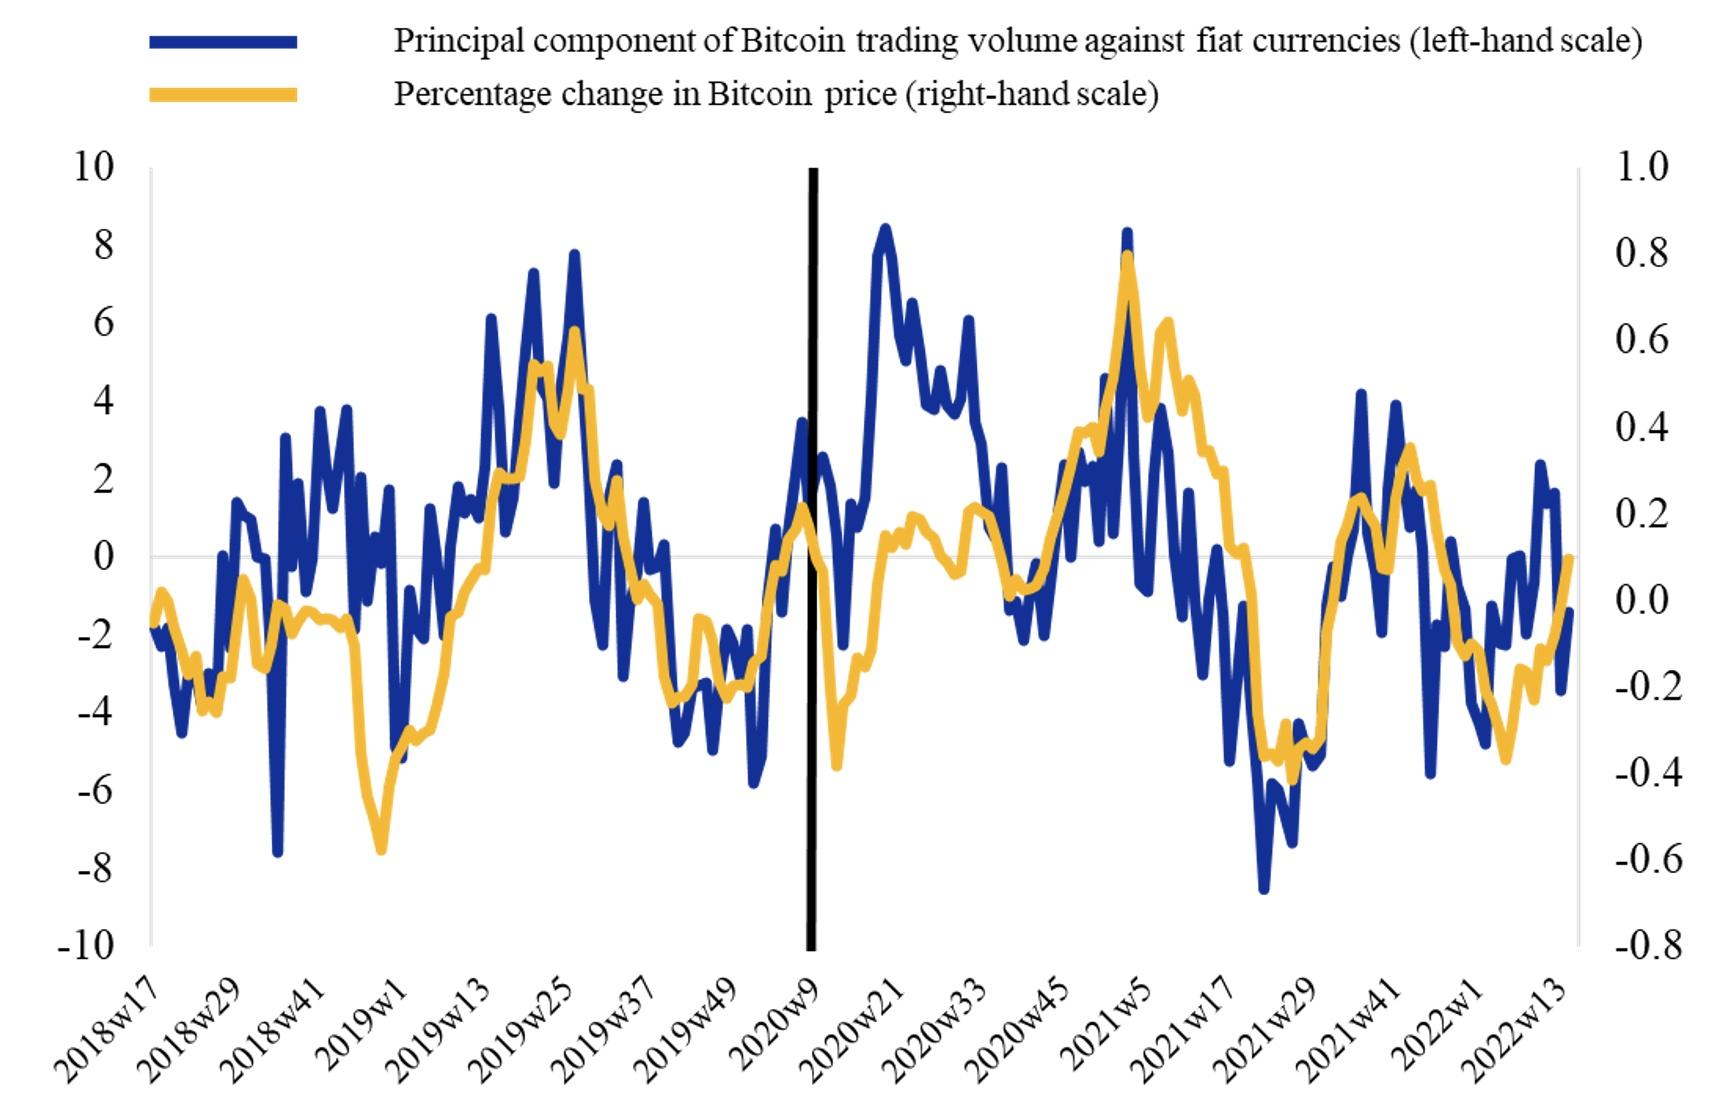 Figure 1 A global factor in Bitcoin trading volumes against fiat currencies is correlated with the Bitcoin price